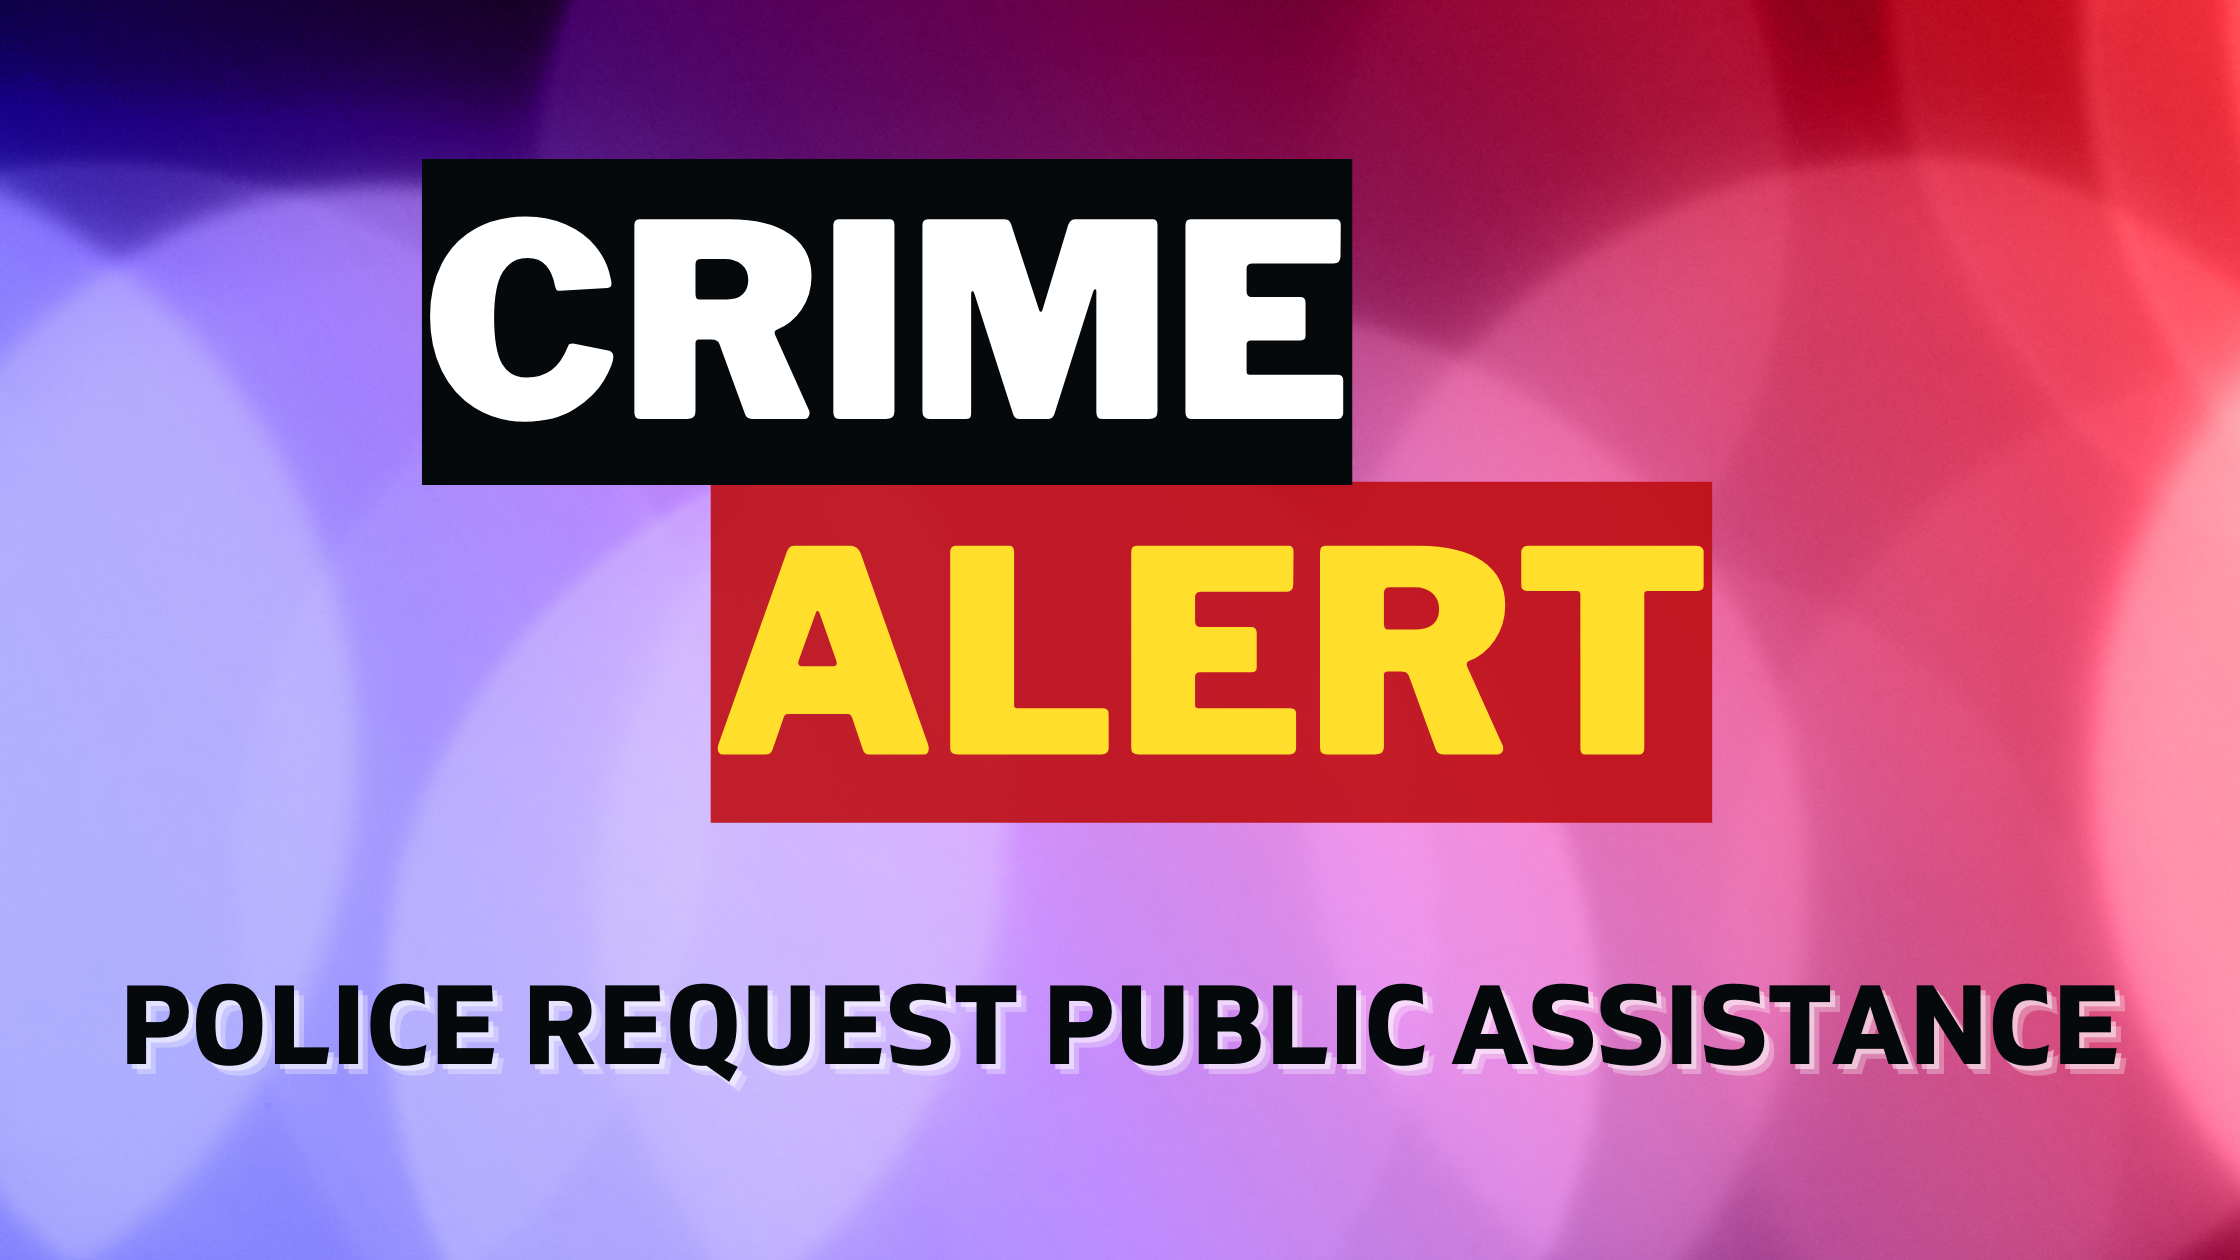 A blue and red background with the bold words "CRIME ALERT" and "police request public assistance"